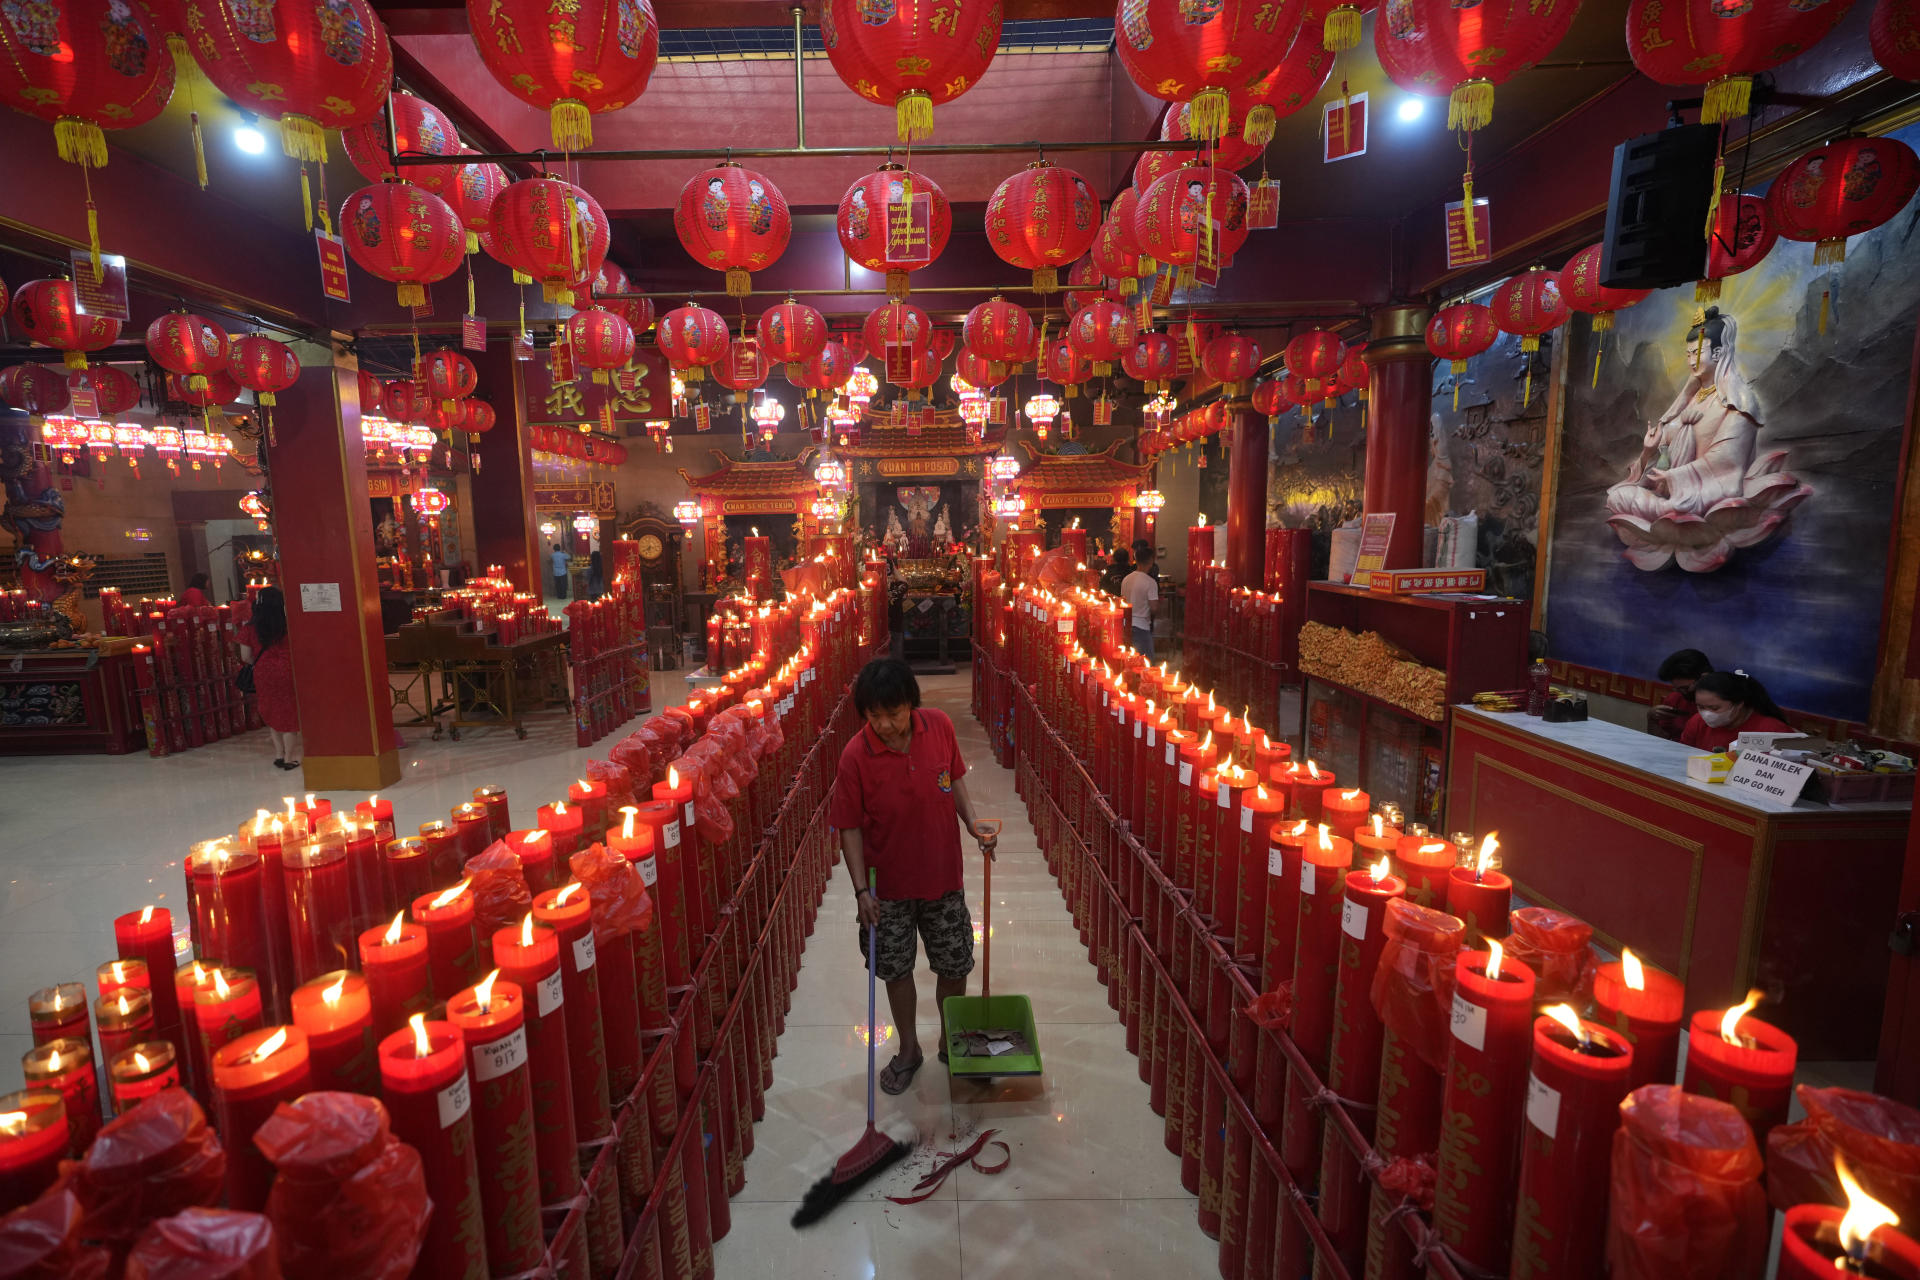 In the Hok Lay Kiong temple, in Bekasi, Indonesia, on January 22, 2023.